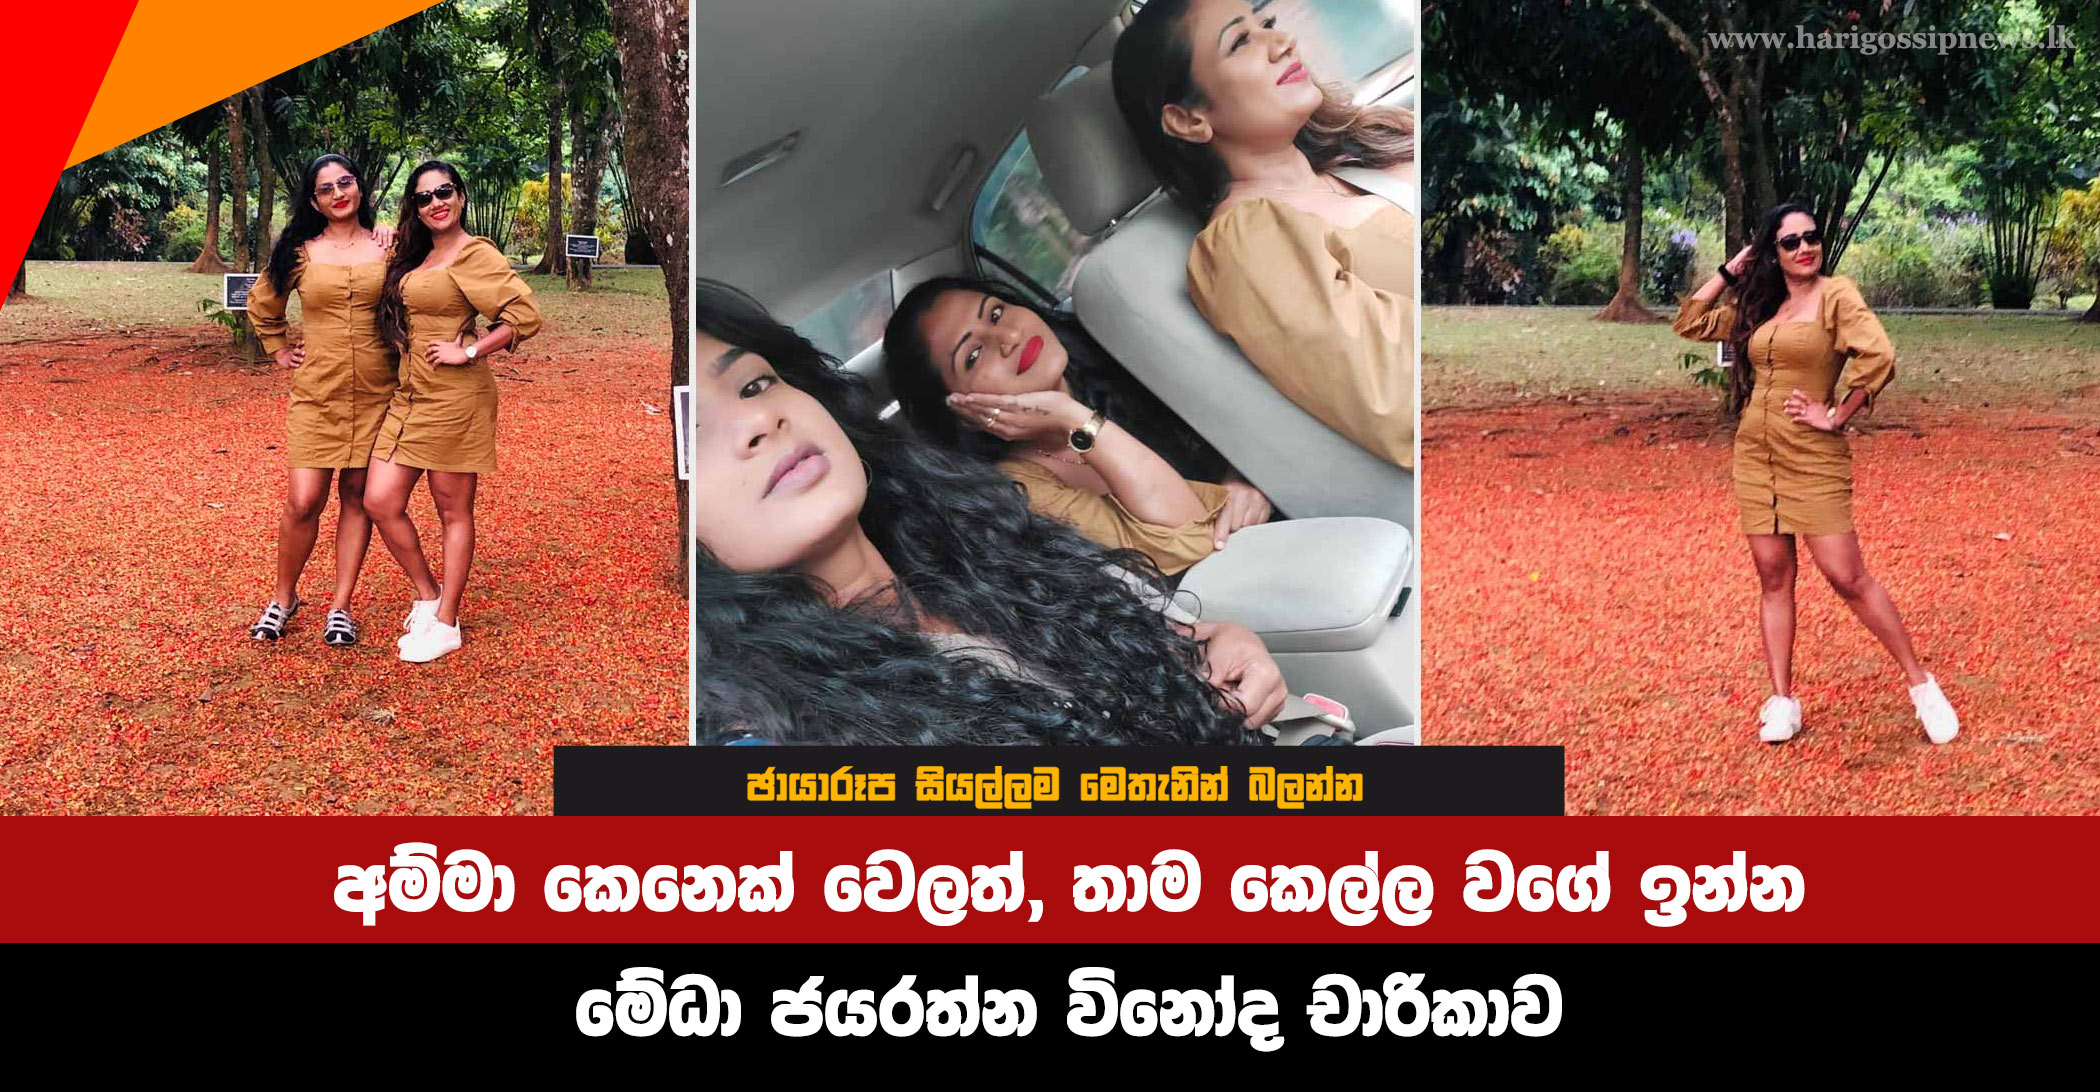 Medha-Jayaratne's-excursion-to-be-a-girl-even-though-she-is-a-mother